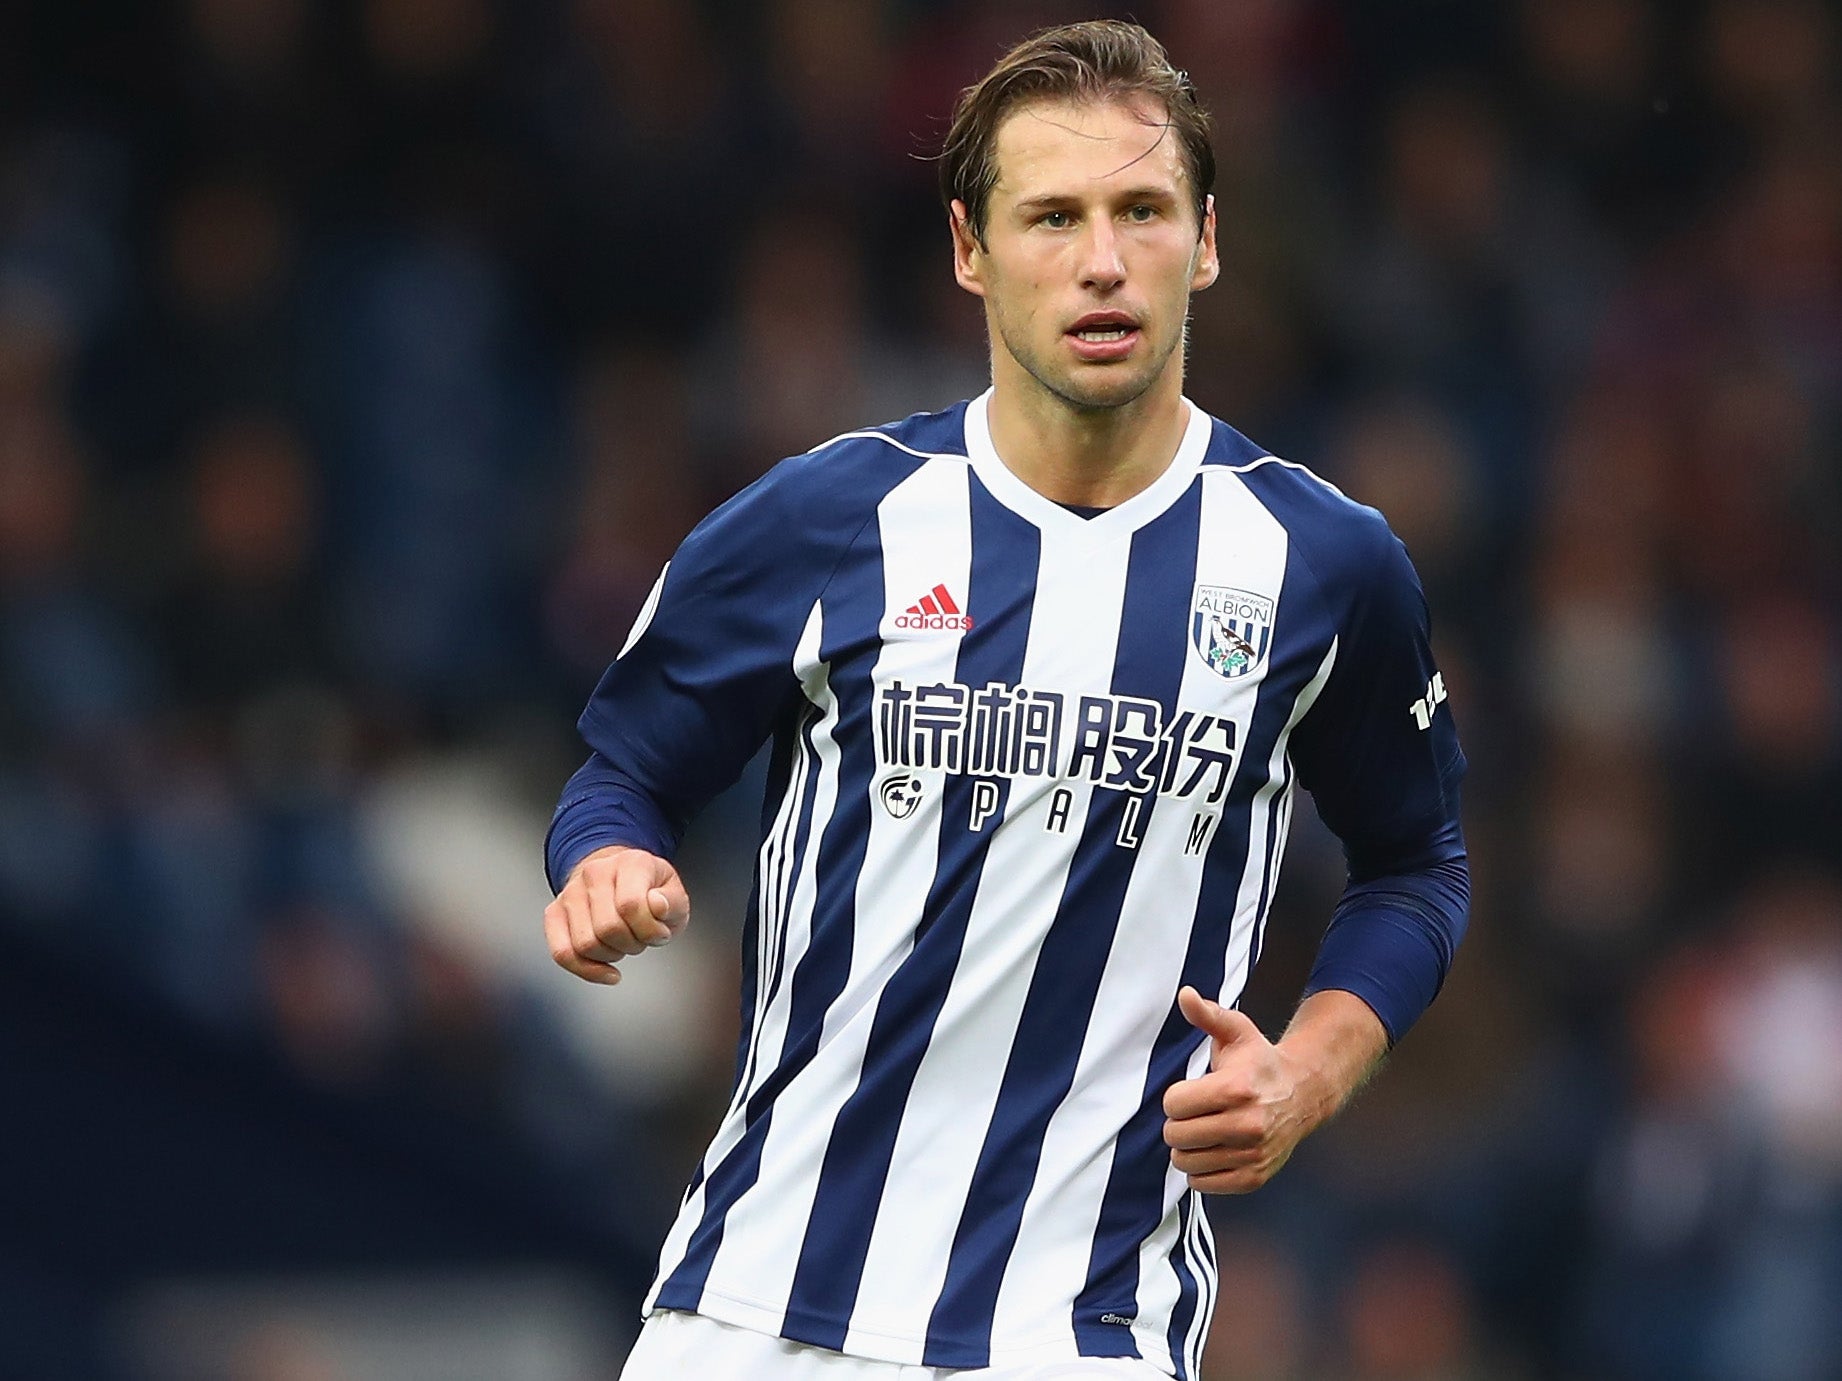 Grzegorz Krychowiak is on loan at the Hawthorns until the end of the season